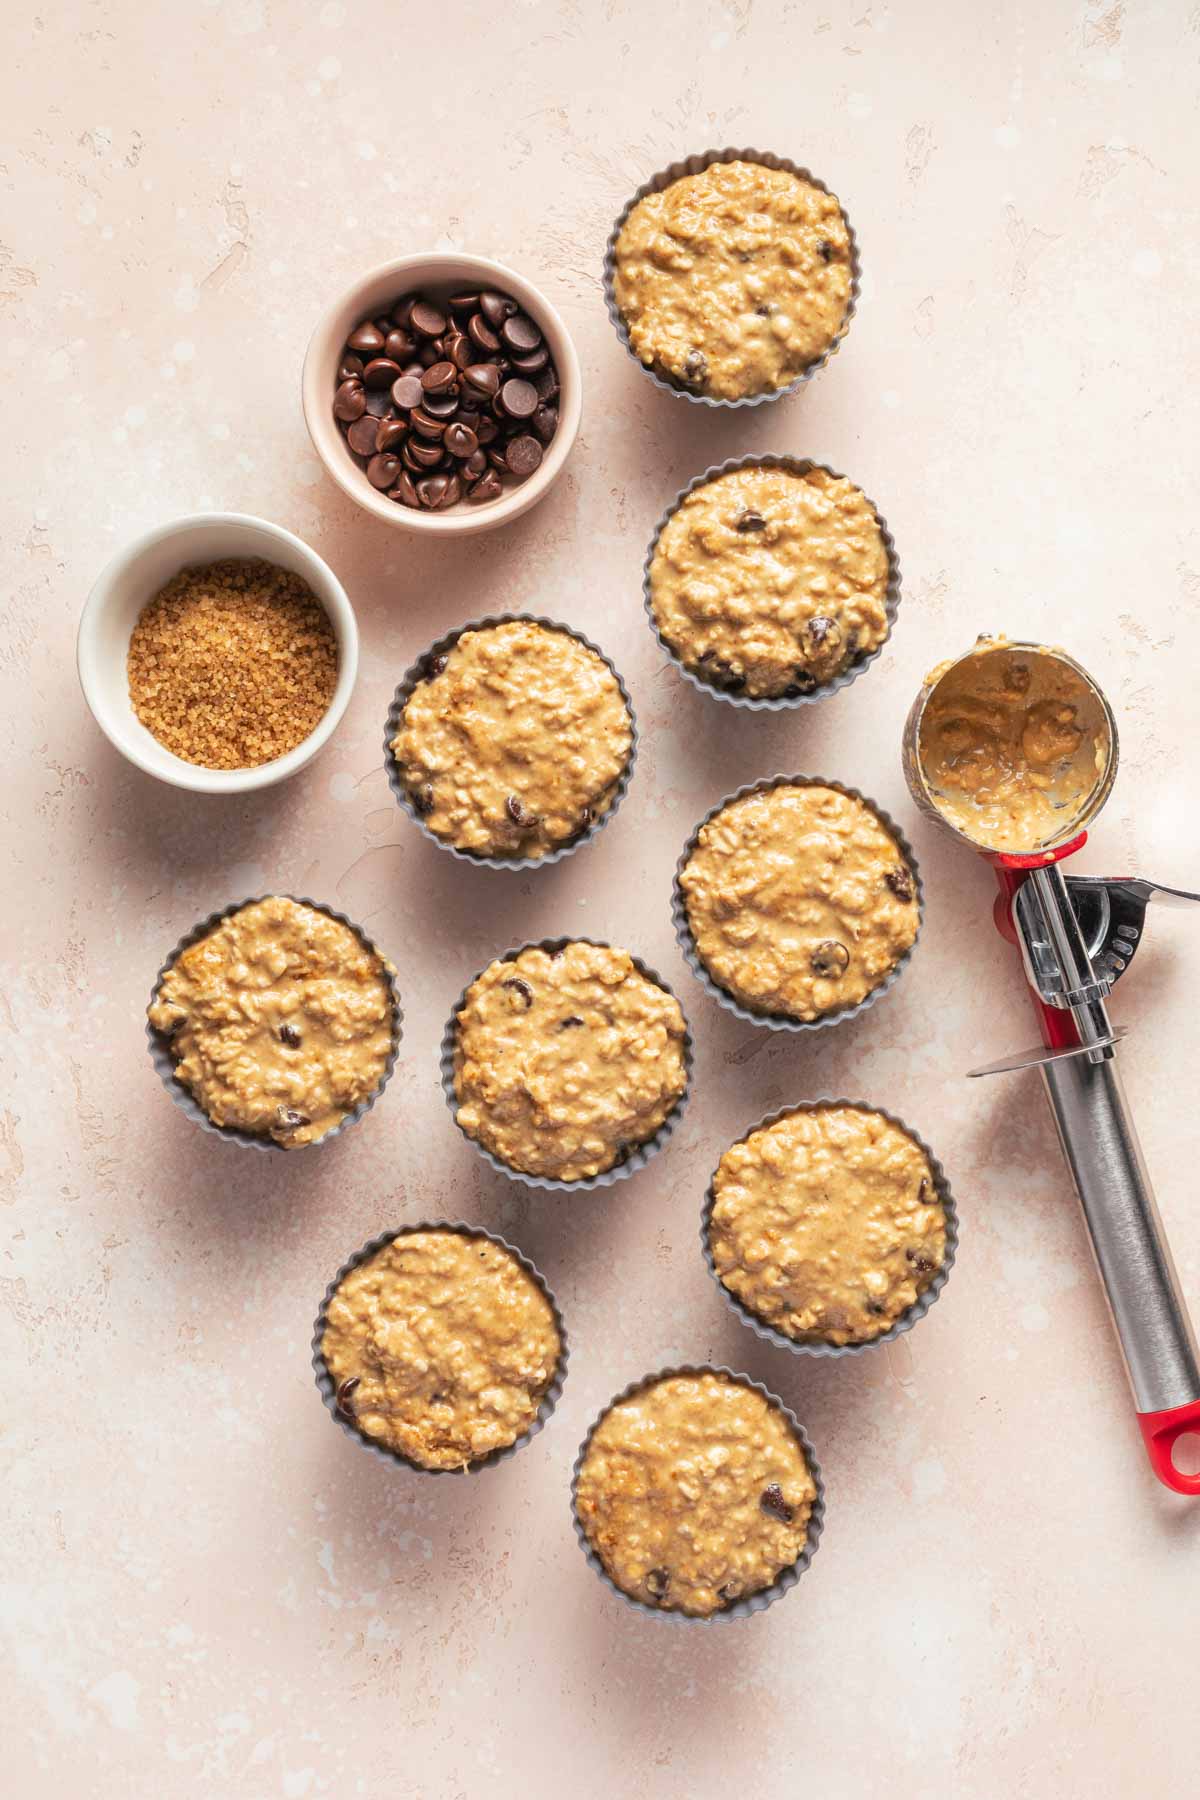 Overhead view of muffin batter in silicone muffin cups.